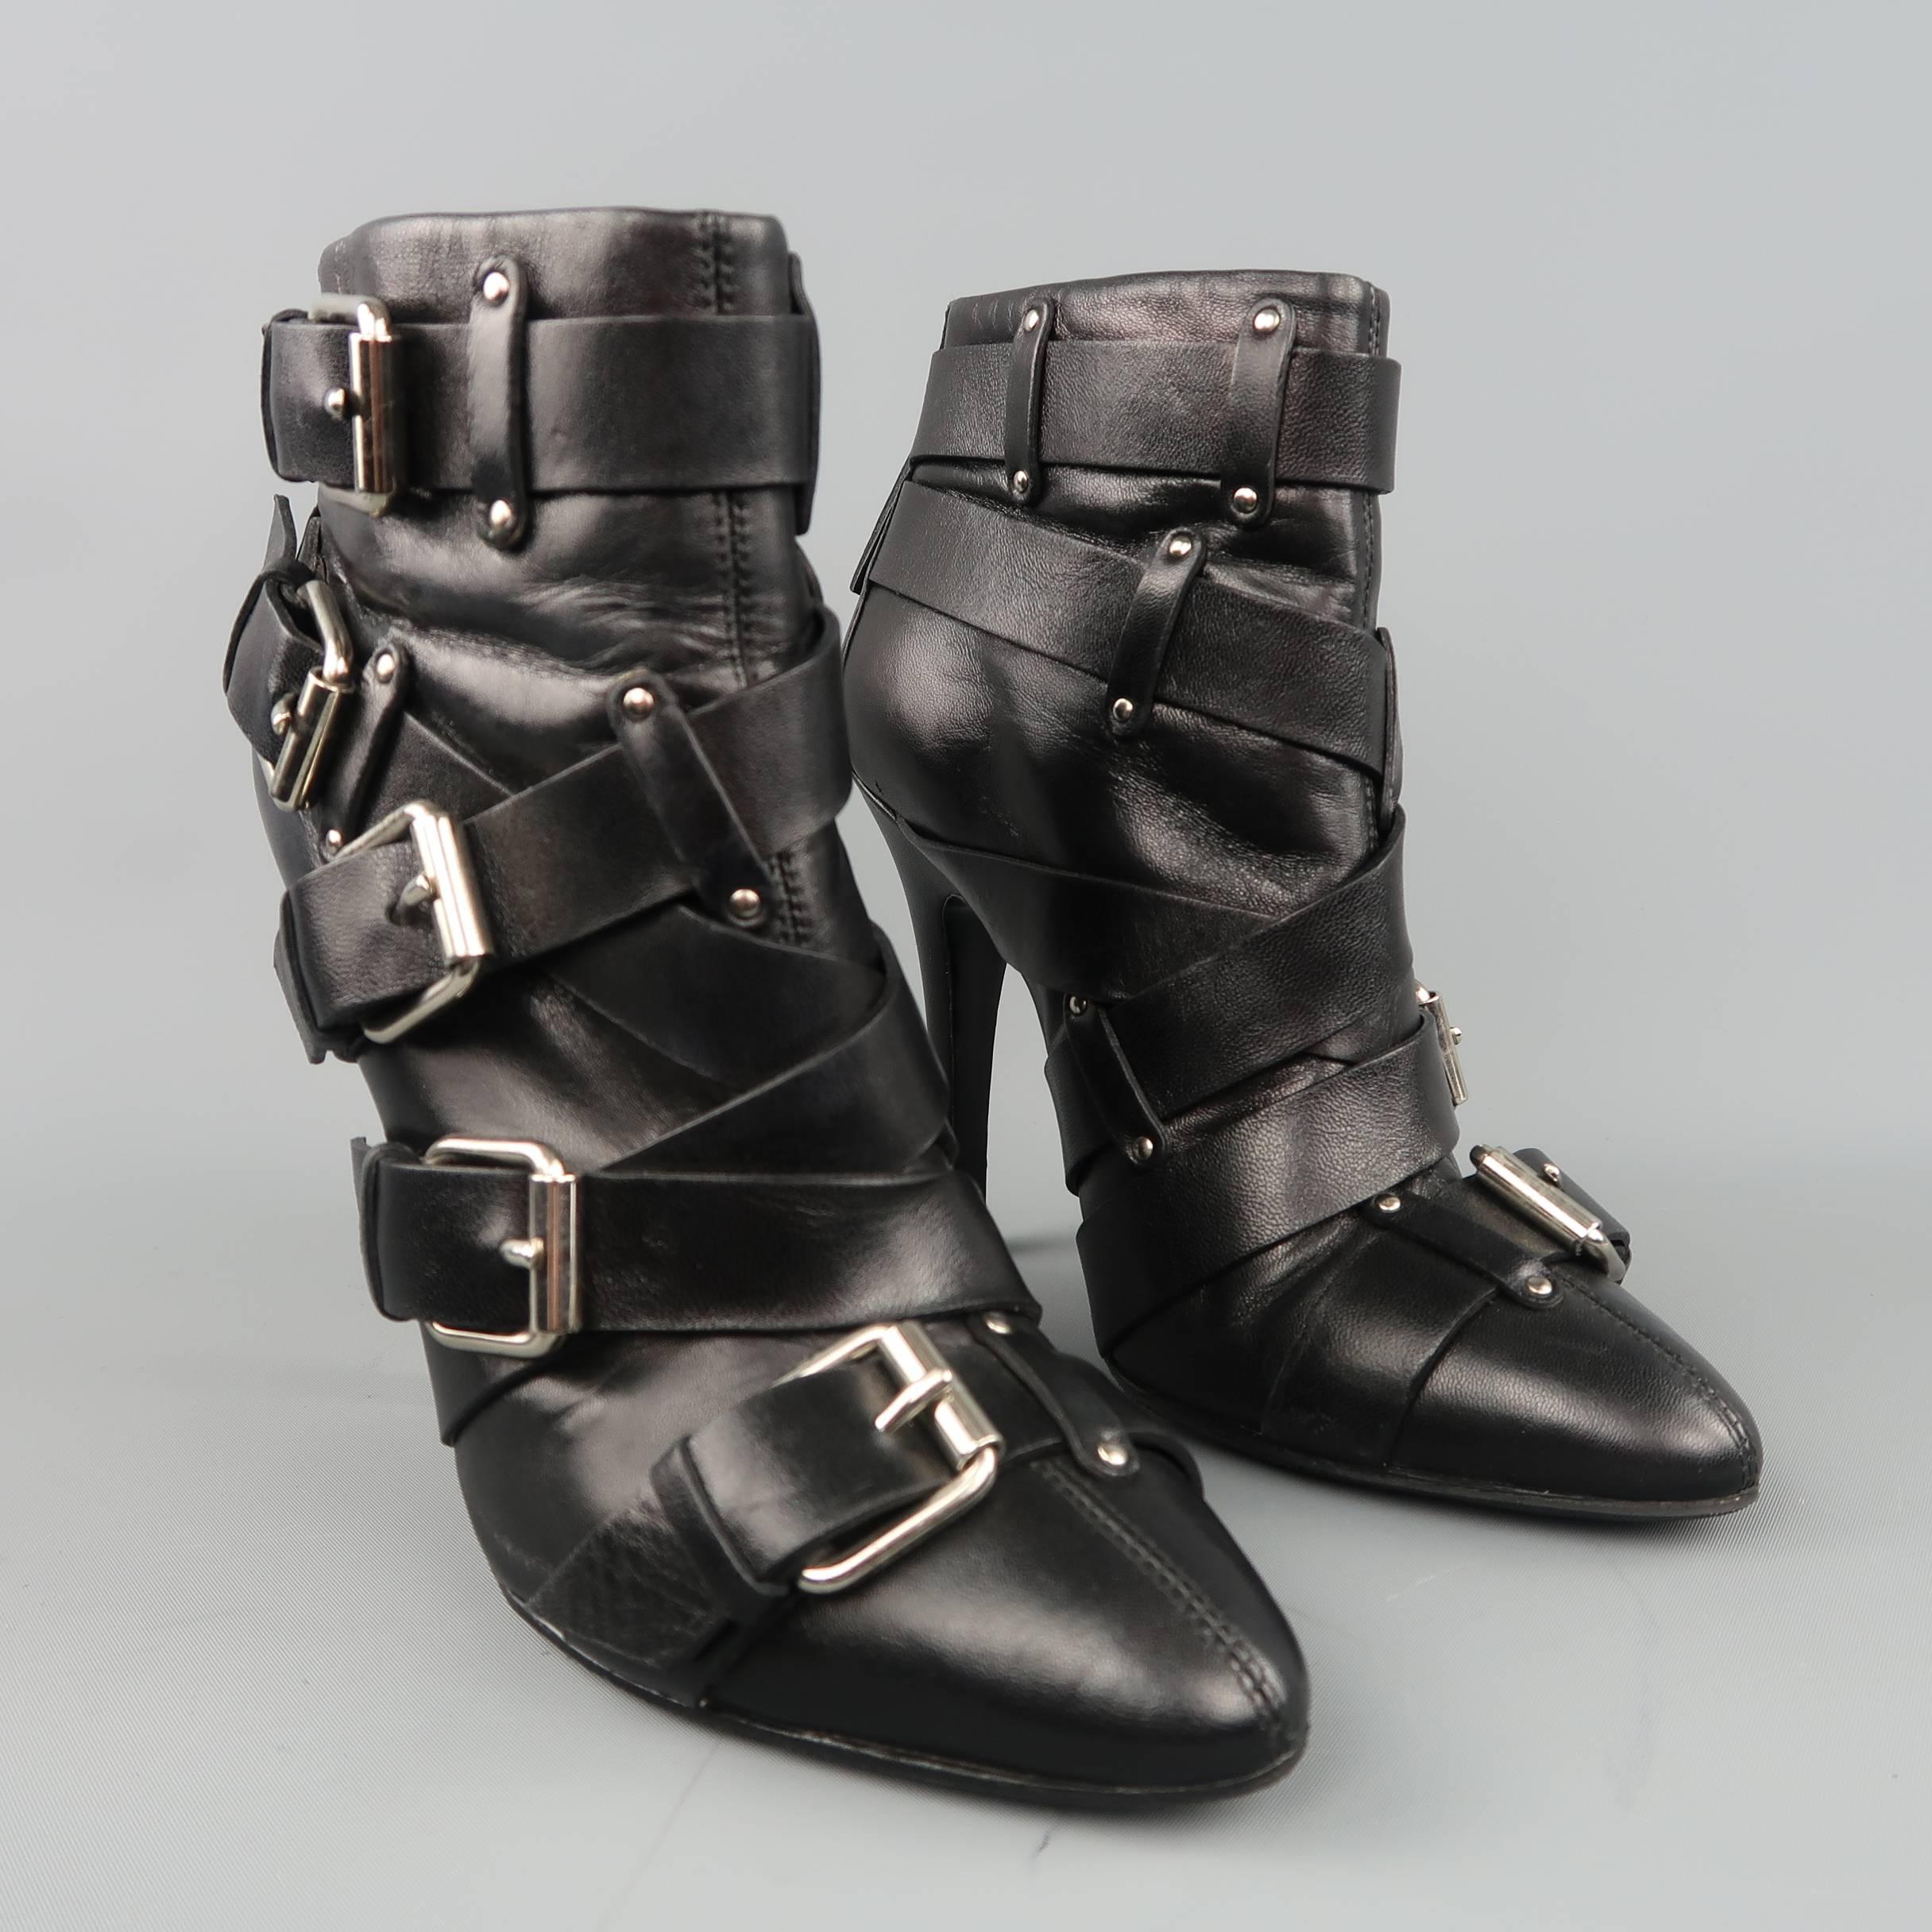 BALMAIN by GIUSEPPE ZANOTTI ankle booties come in smooth black leather with a pointed toe, covered stiletto heel, back zipper closure, and layered belt straps with silver tone buckles. Circa 2010. Skid sole added. Made in Italy.
 
Good Pre-Owned